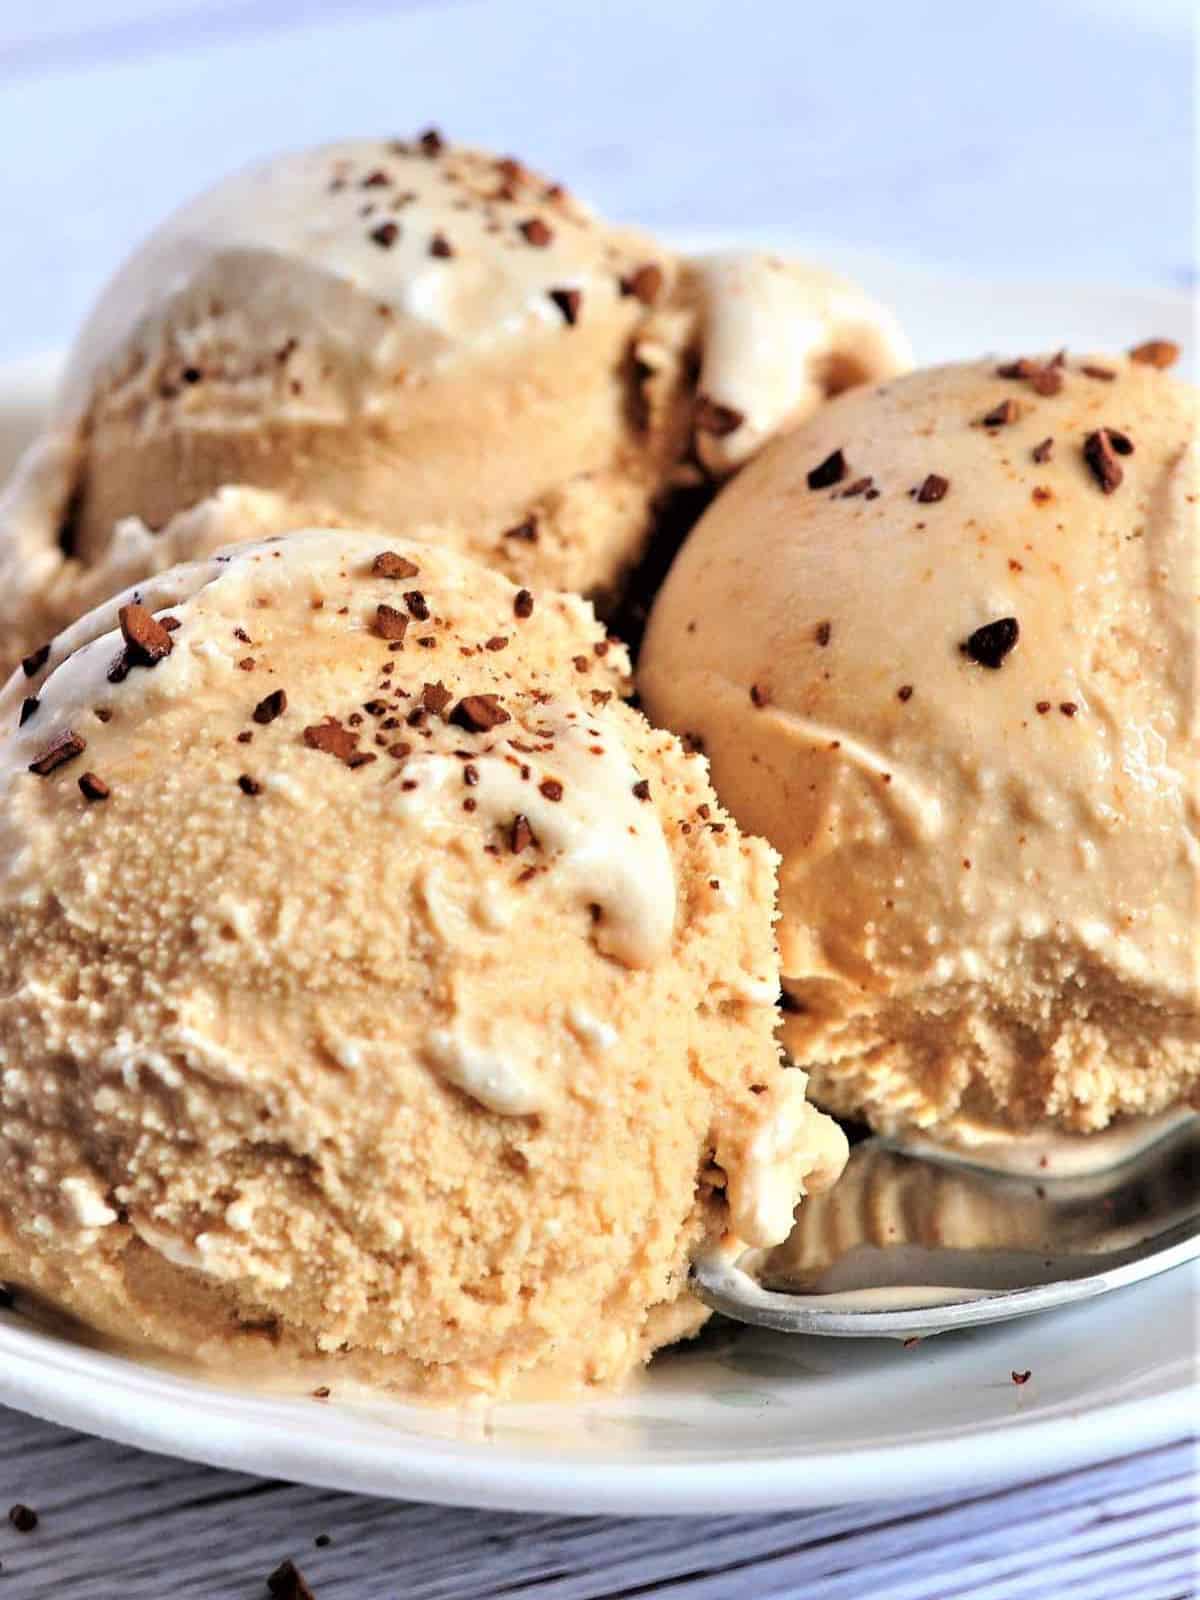 delicious coffee ice cream made using instant coffee granules.